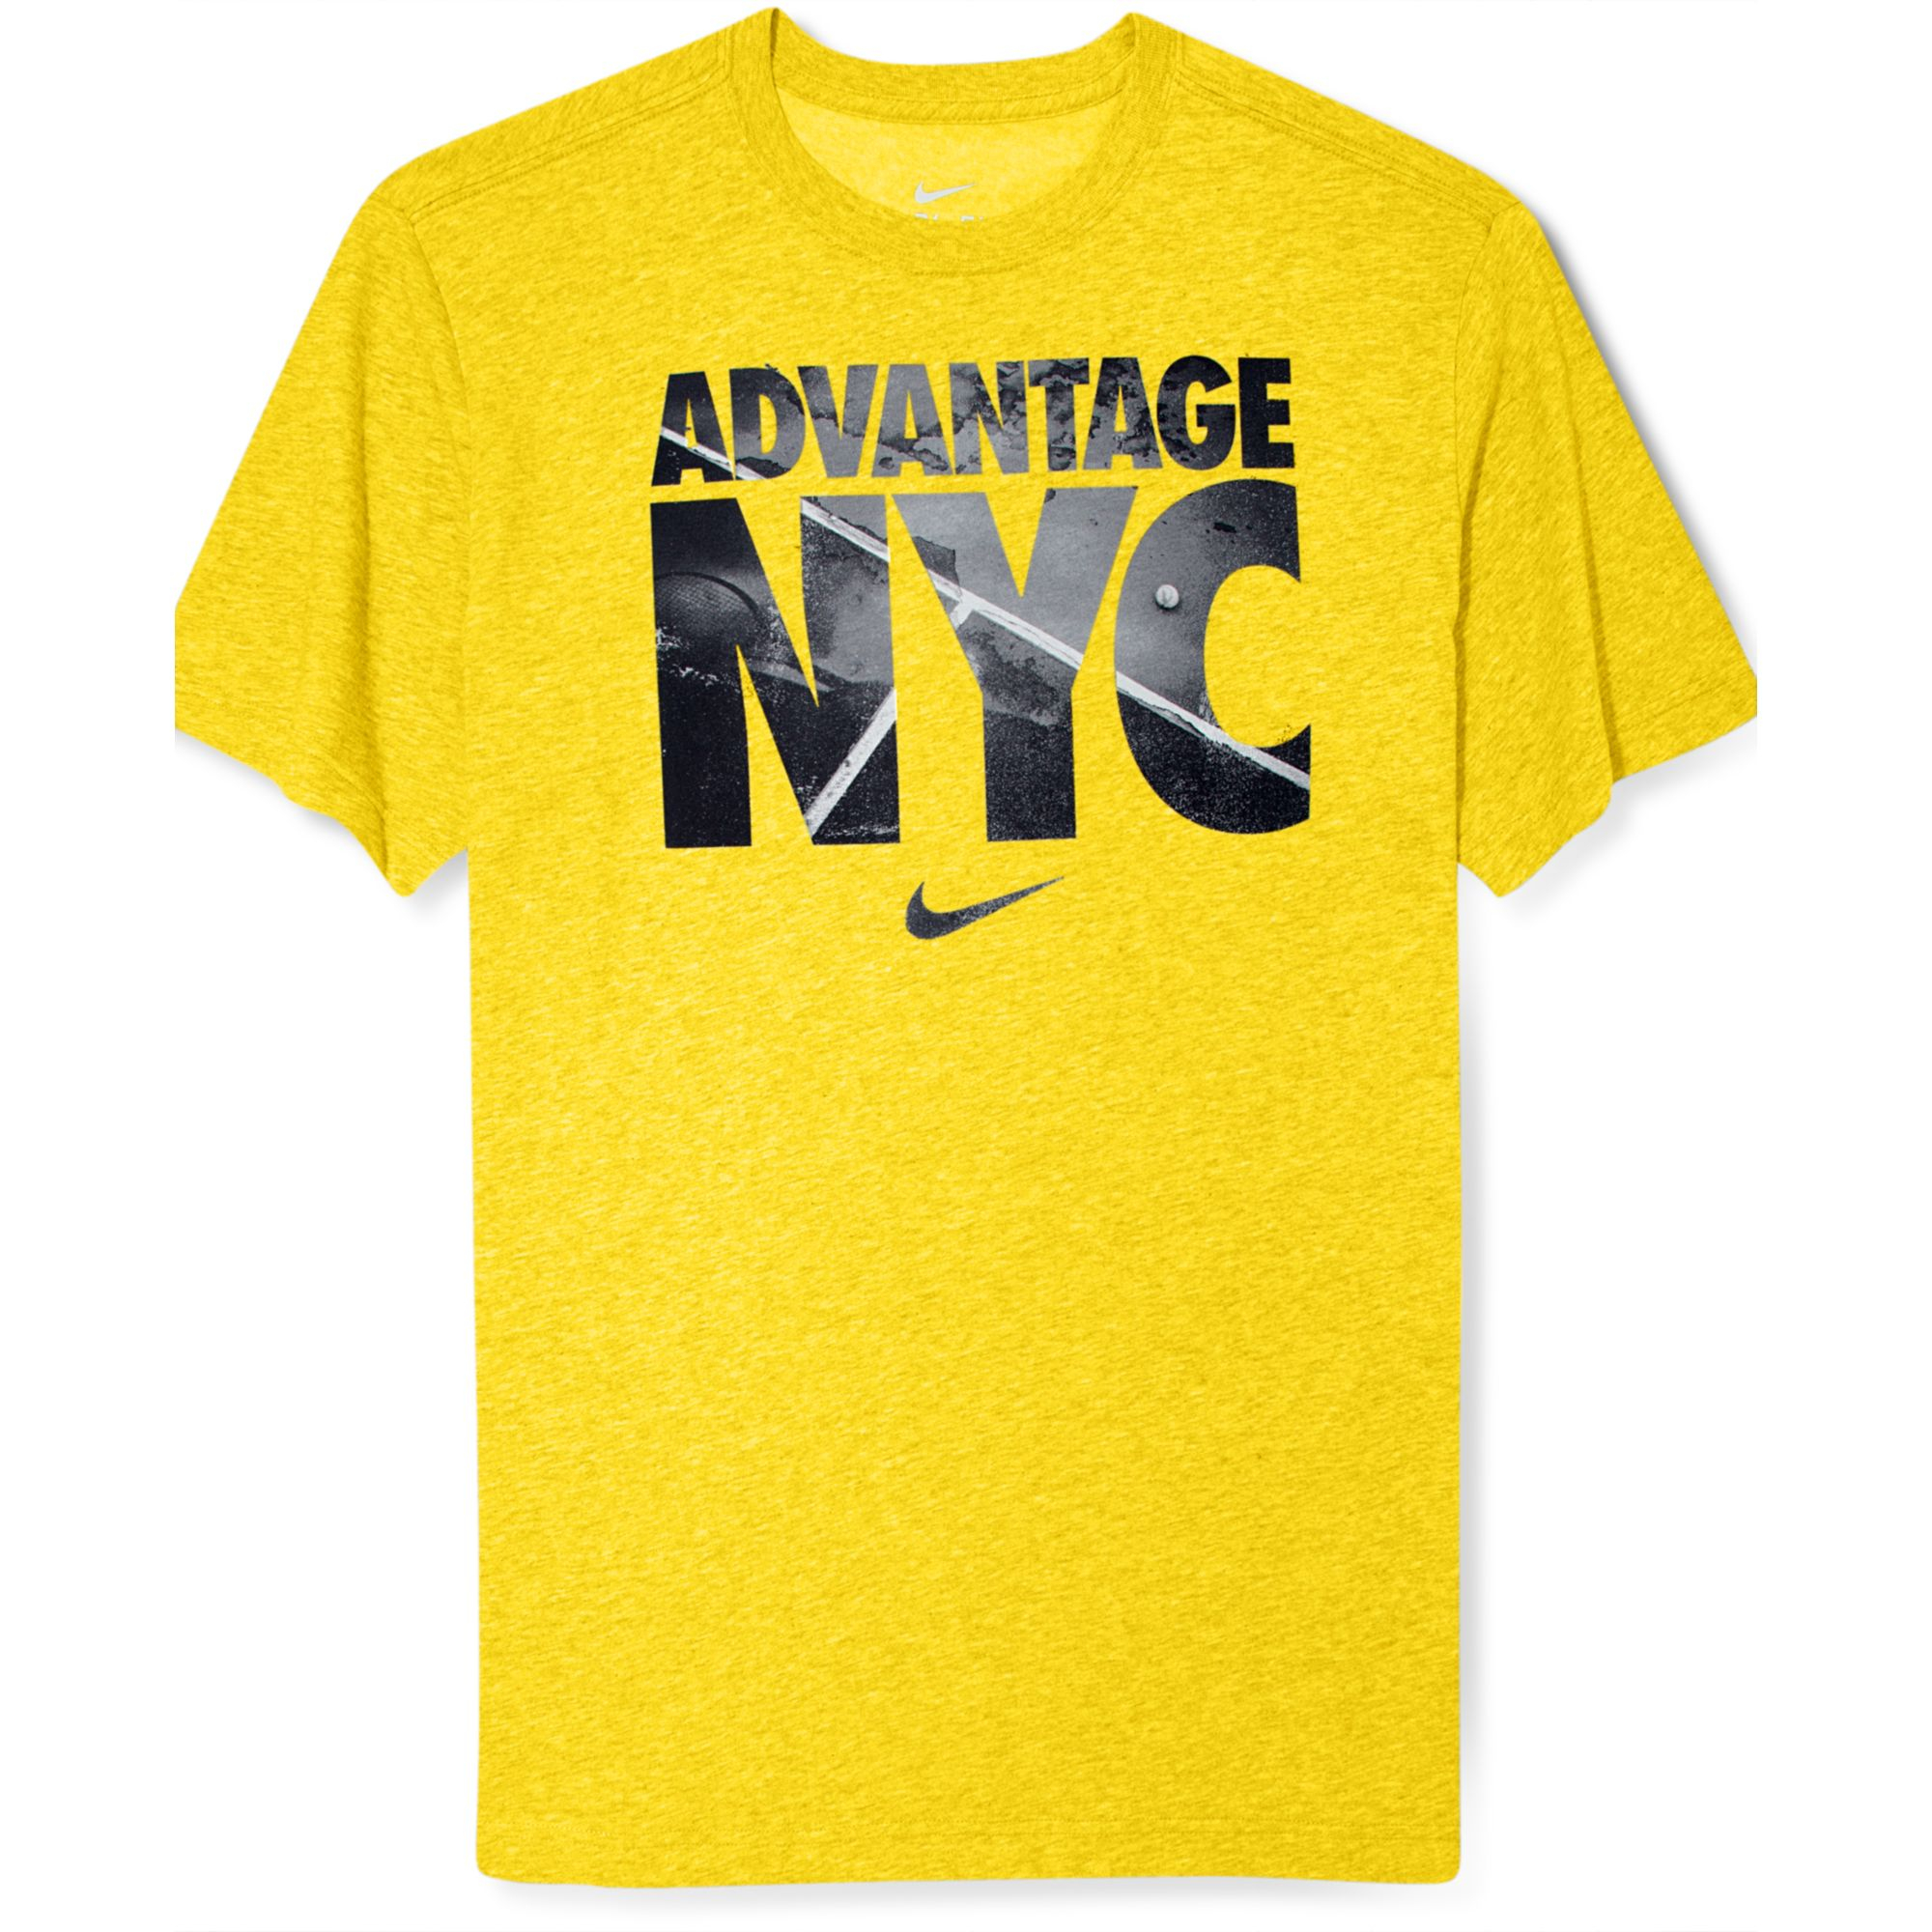 Lyst - Nike Advantage Nyc Tennis T-shirt in Yellow for Men